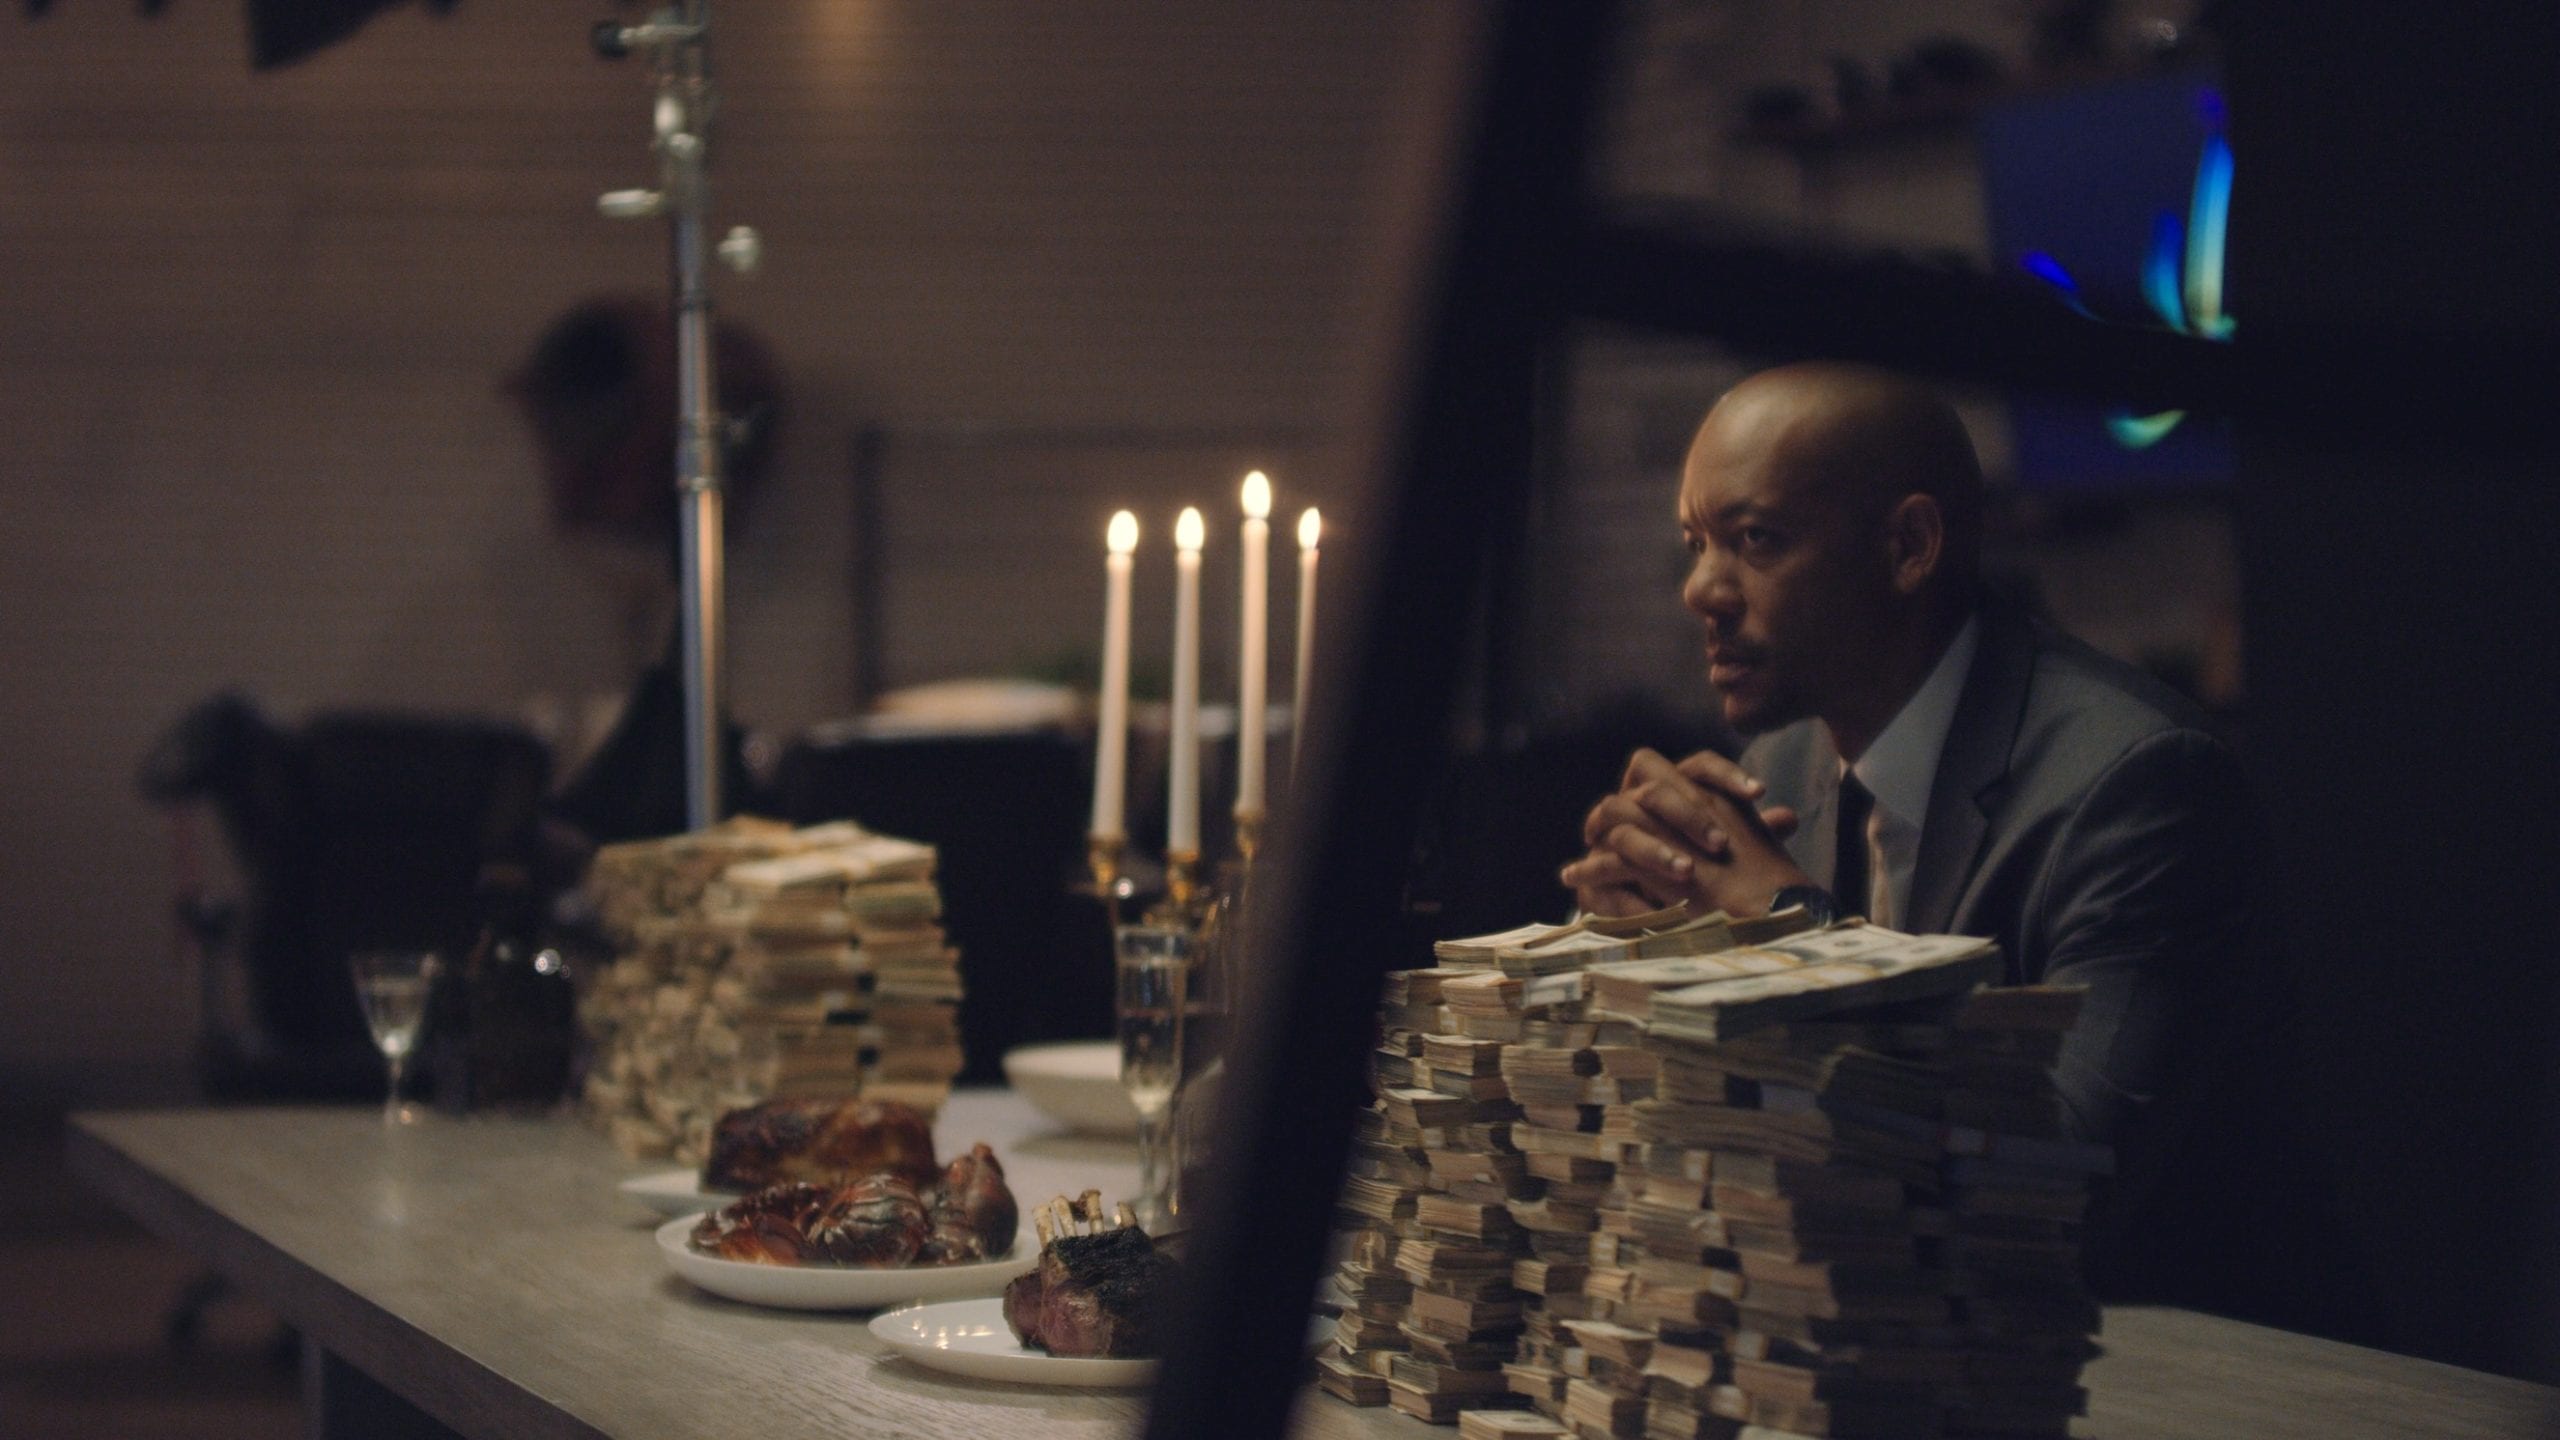 Becoming Immortal A New Original TV Series Side profile of African American man sitting at a table with food, drinks, a candelabra and stacks of cash